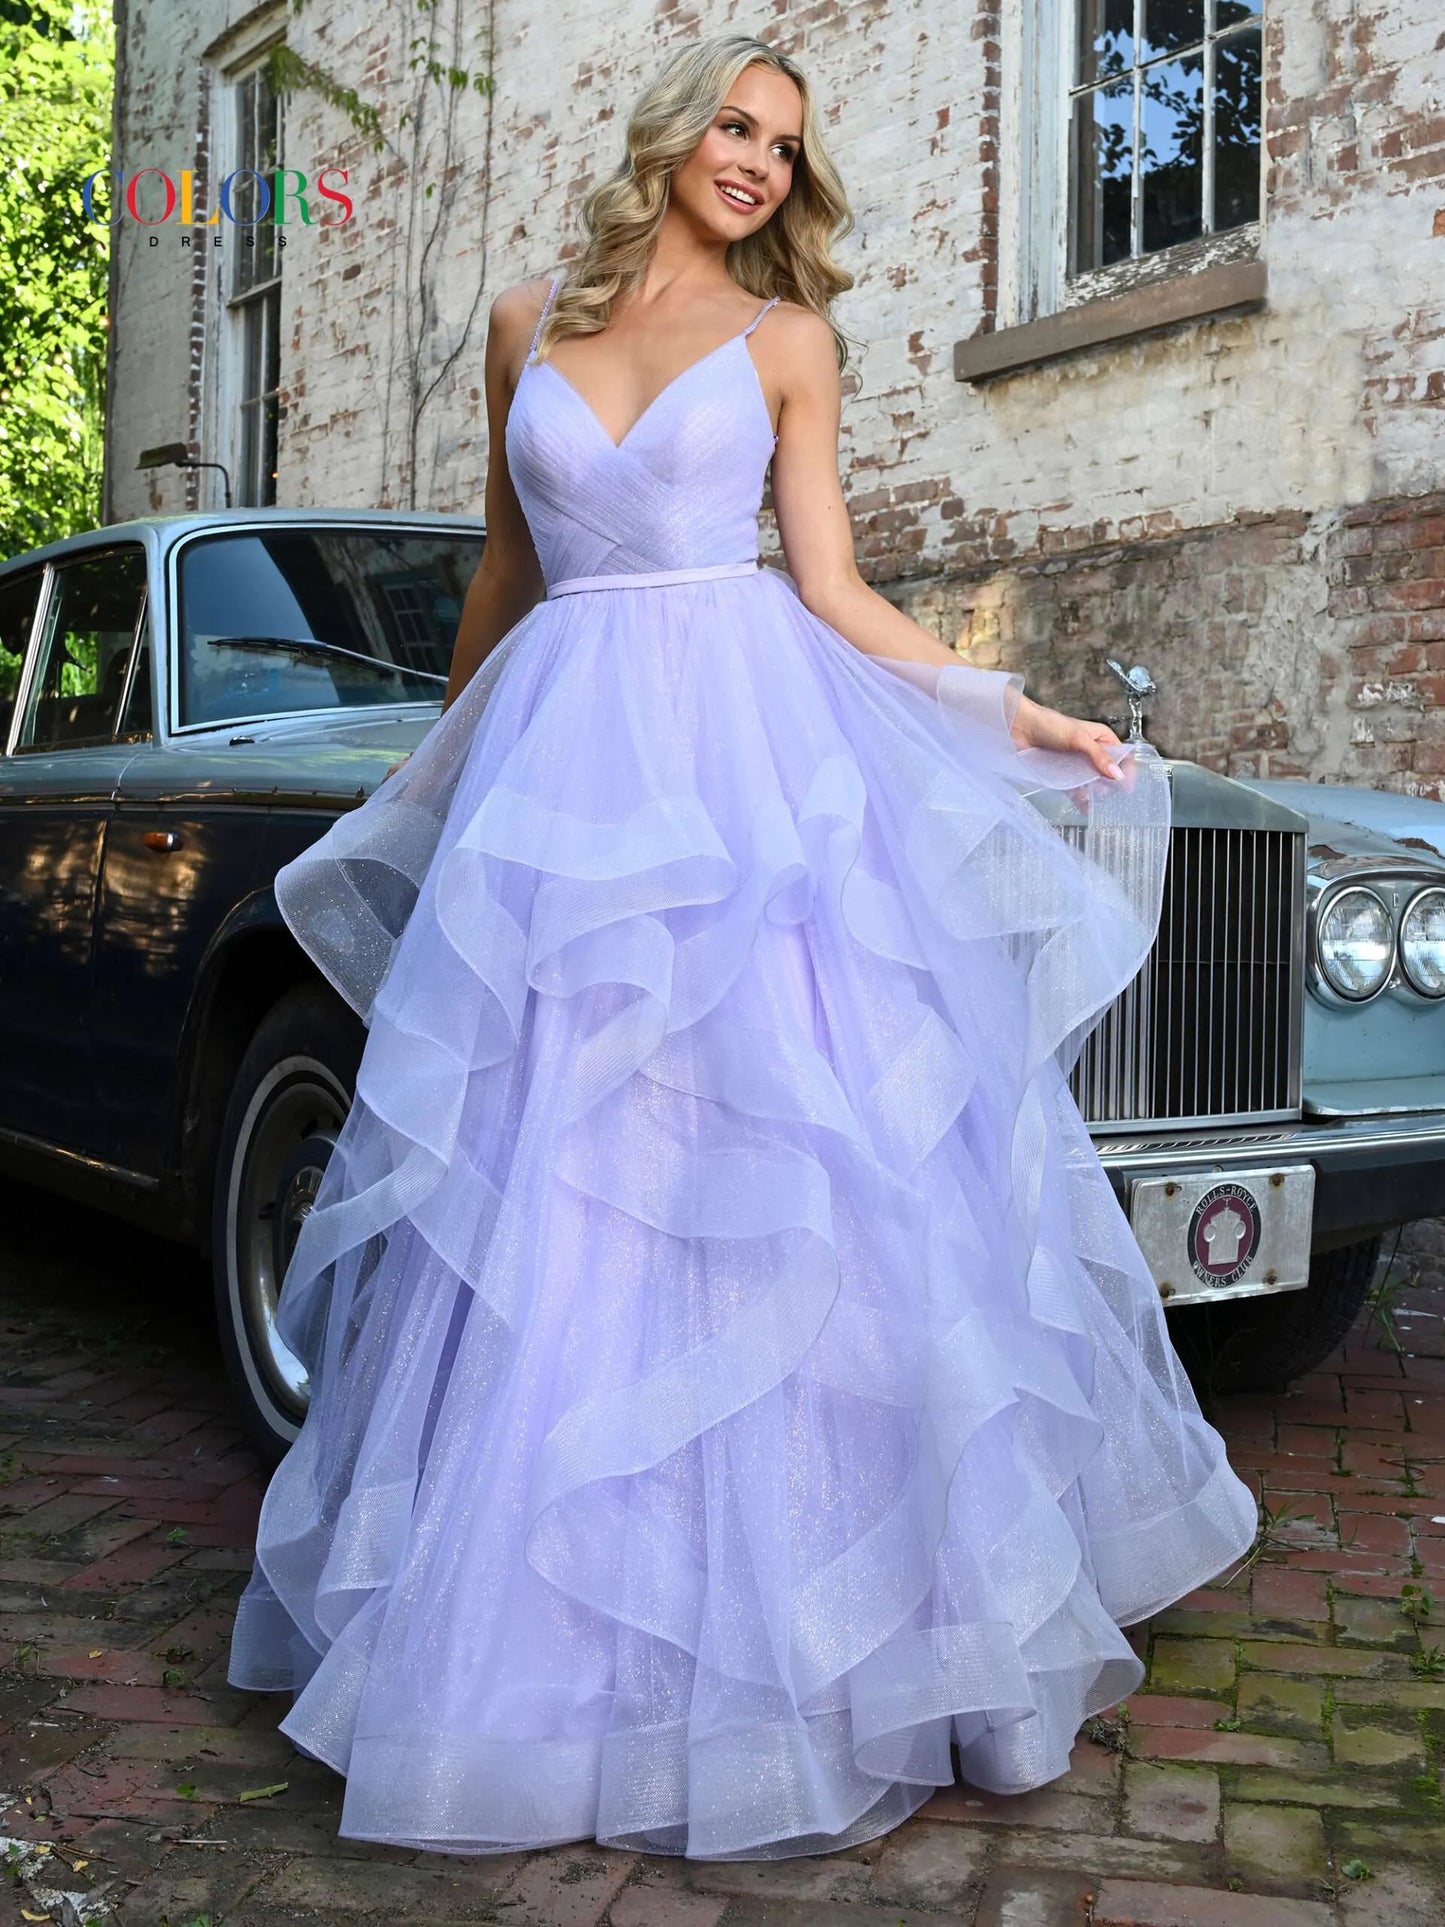 Colors Dress 2381 size 8, 16  Off White Prom Dress Ballgown V Neckline Layered Glitter Tulle Pageant Gown